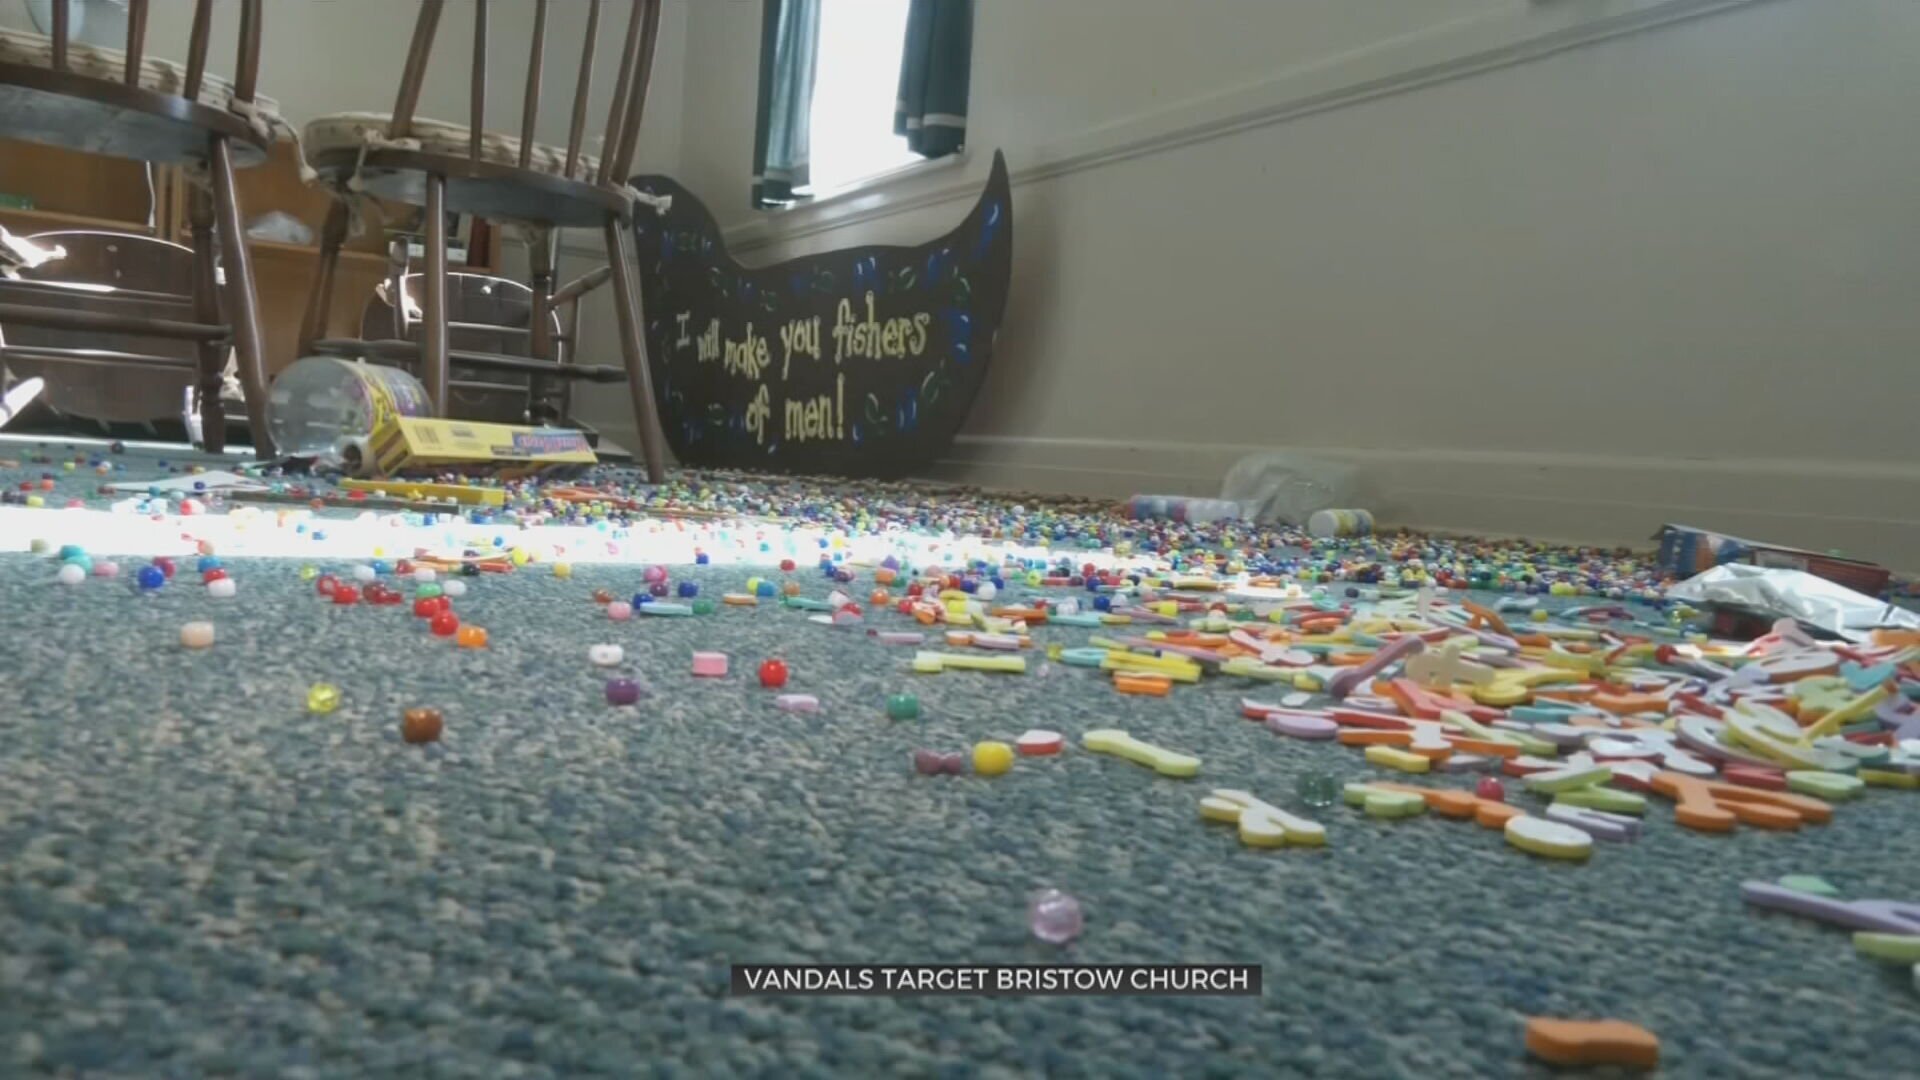 Bristow Church Vandalized, Pastor Says Their Spirit Is Not Damaged